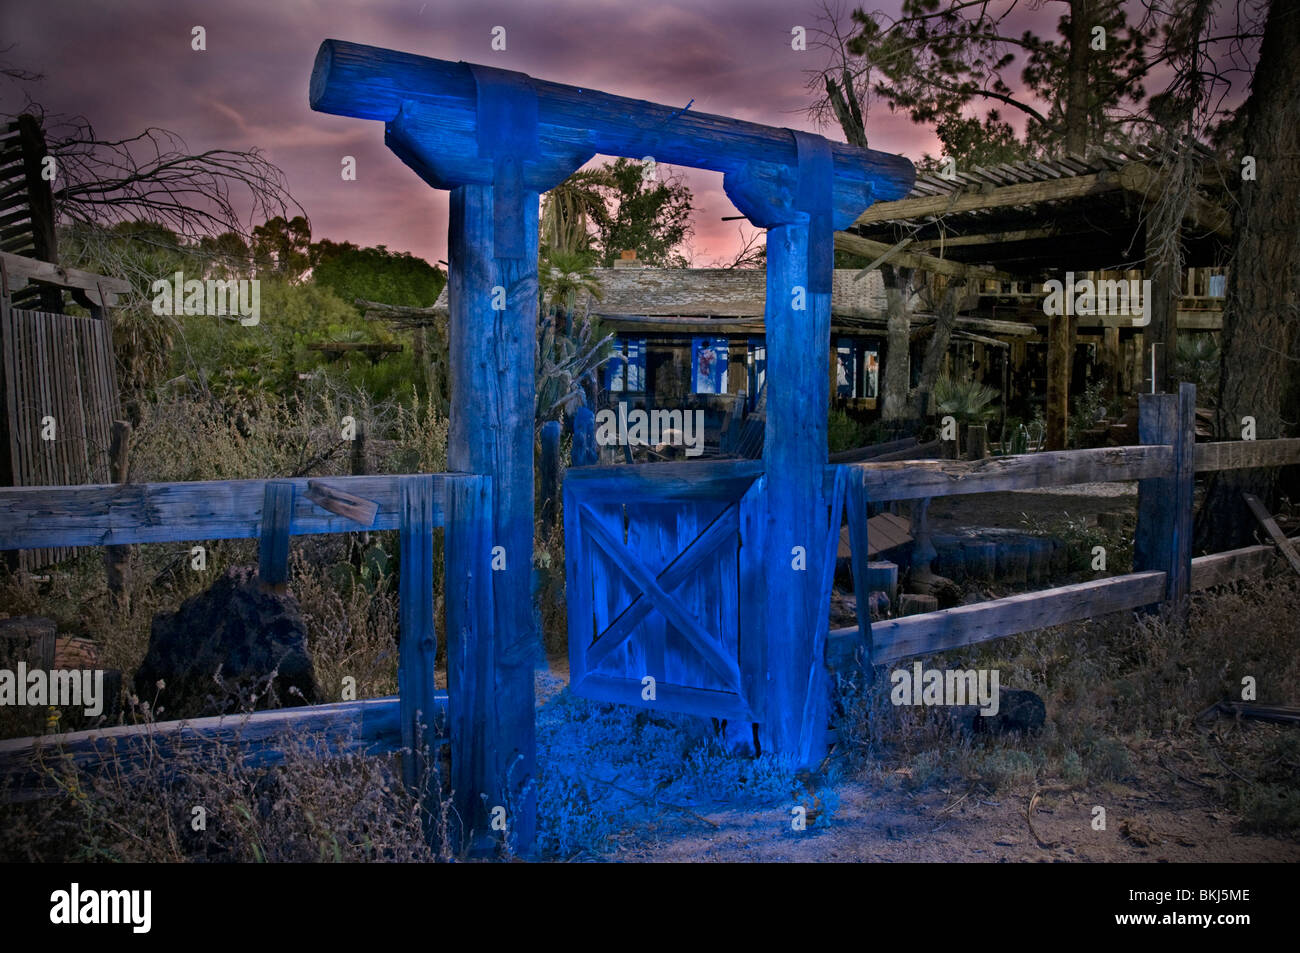 The gate to a creepy old house, painted blue using the "Painting with Light" method at night. Stock Photo